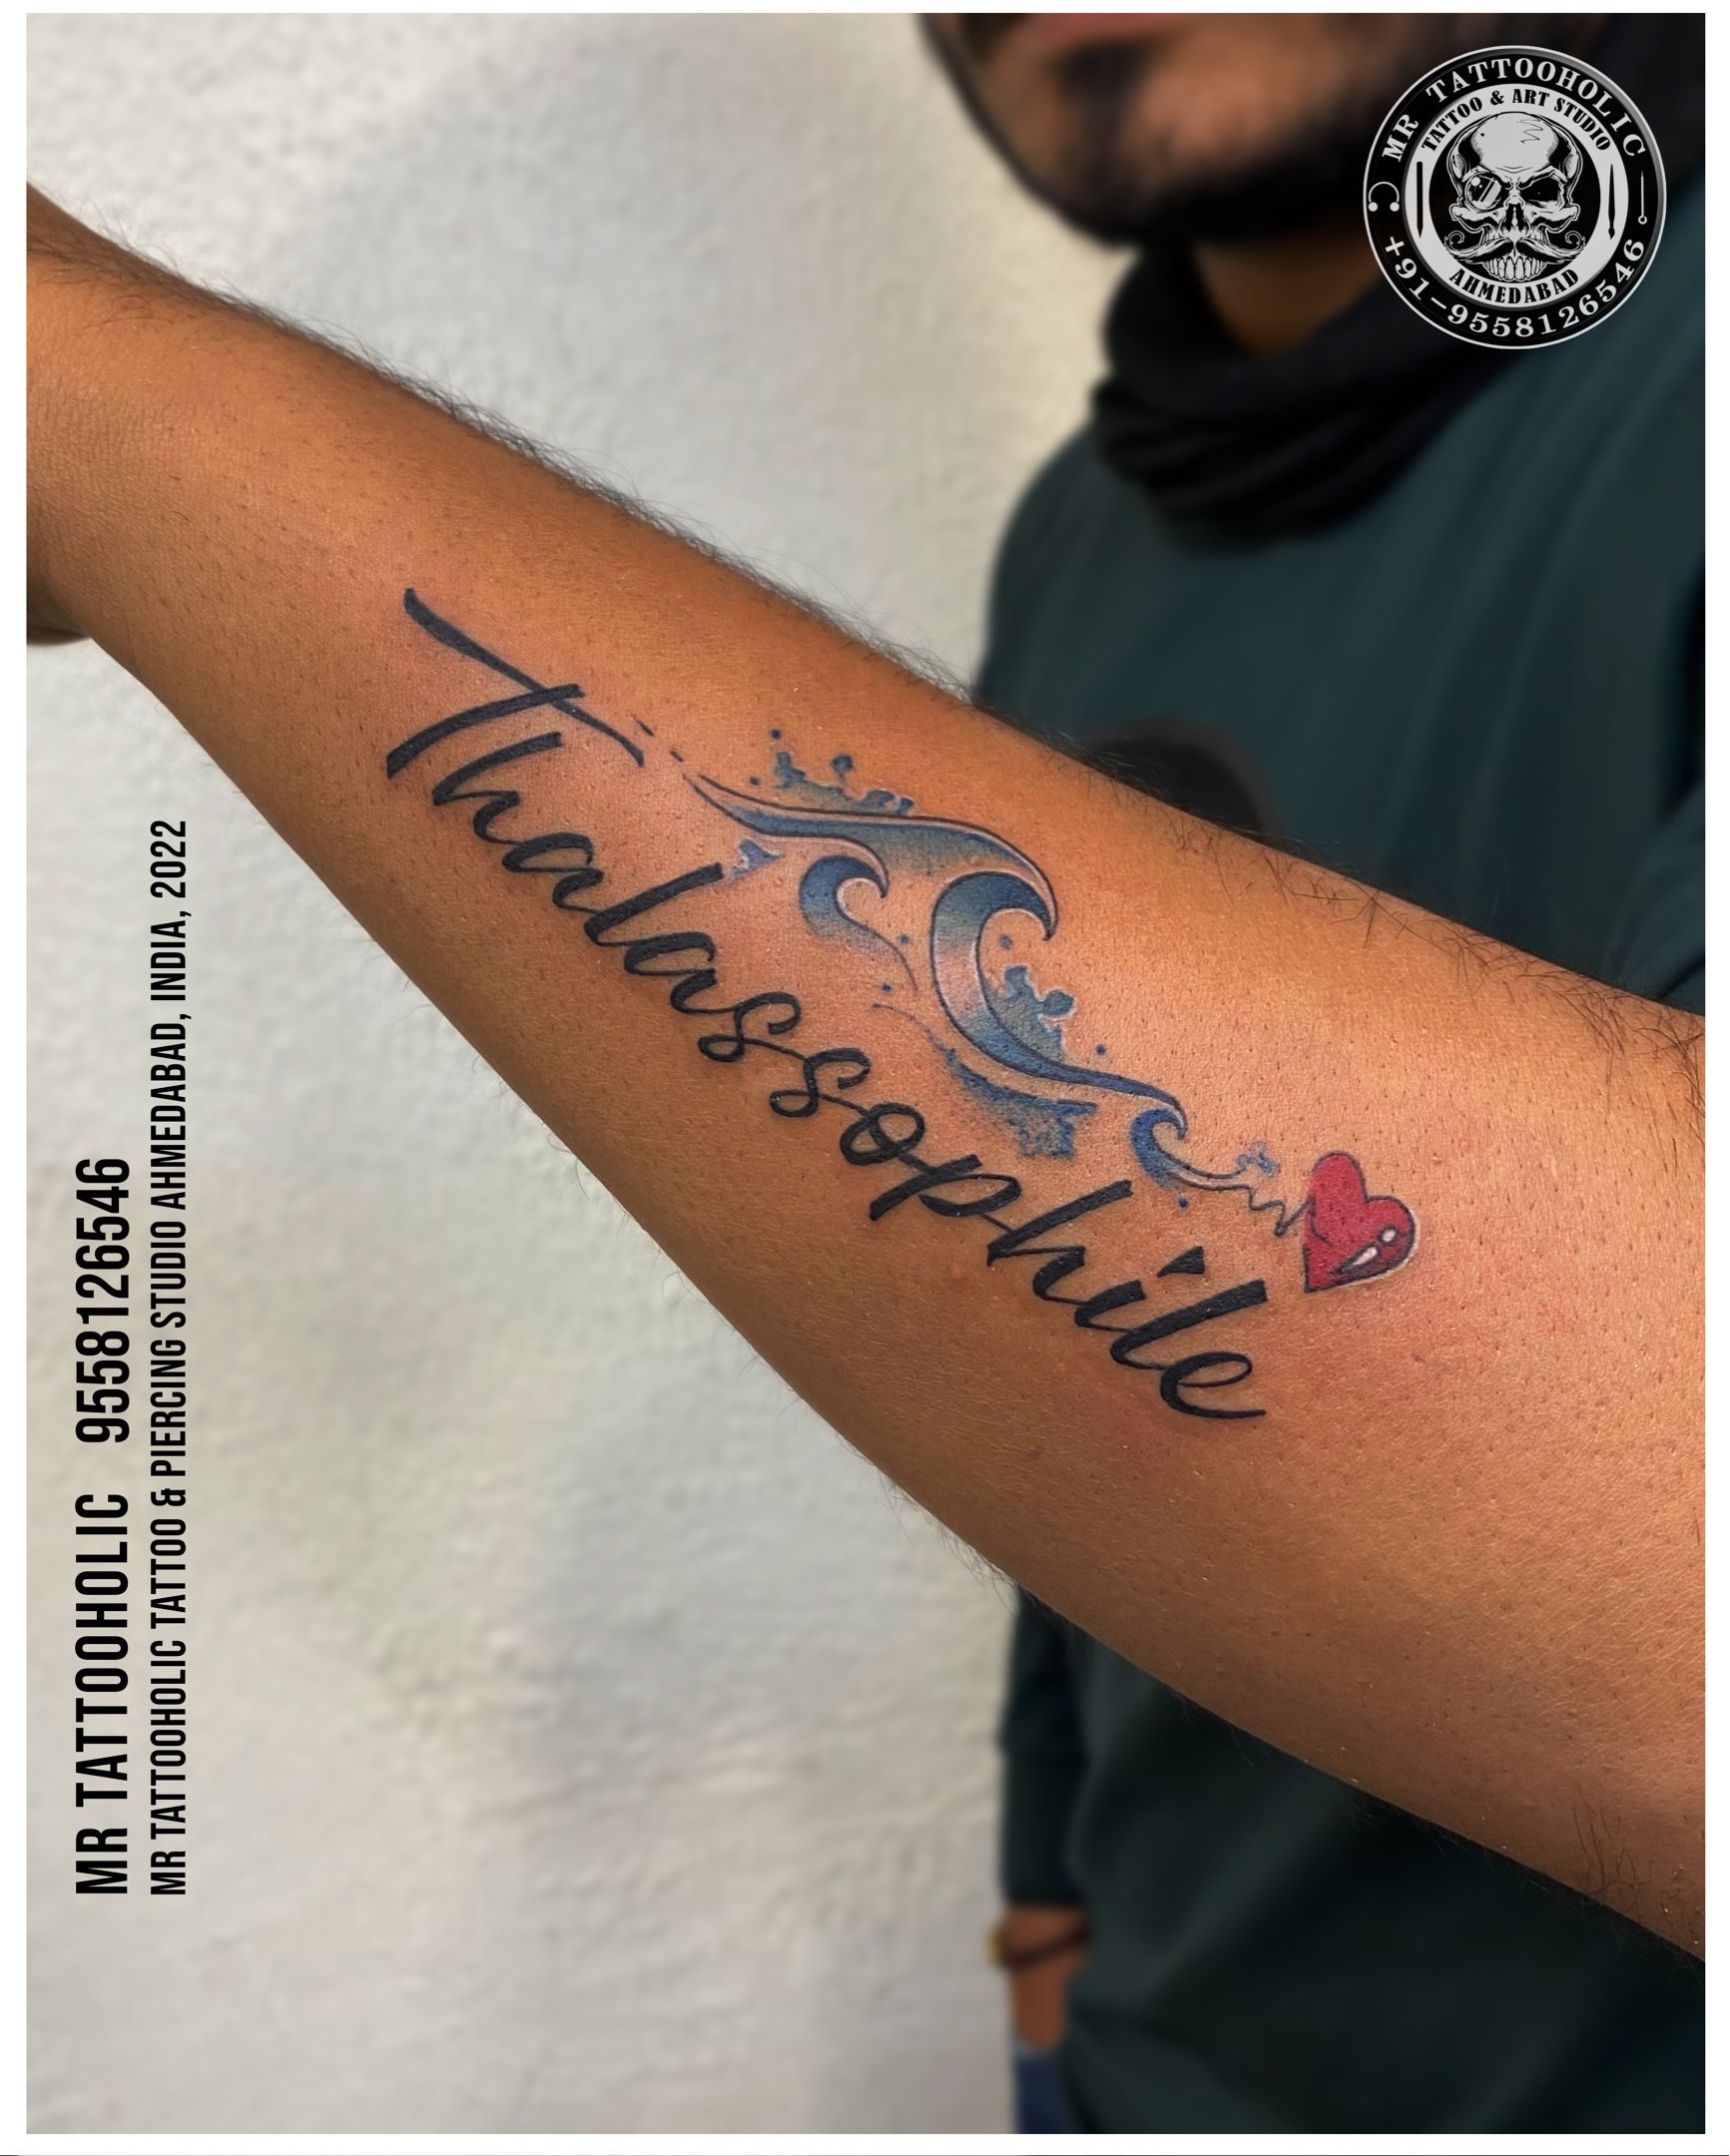 SKIN MACHINE TATTOO STUDIO on Instagram Krishna name tattoo designed and  done by Shraddha fitoor skinmachinetattoo  Email for appointments